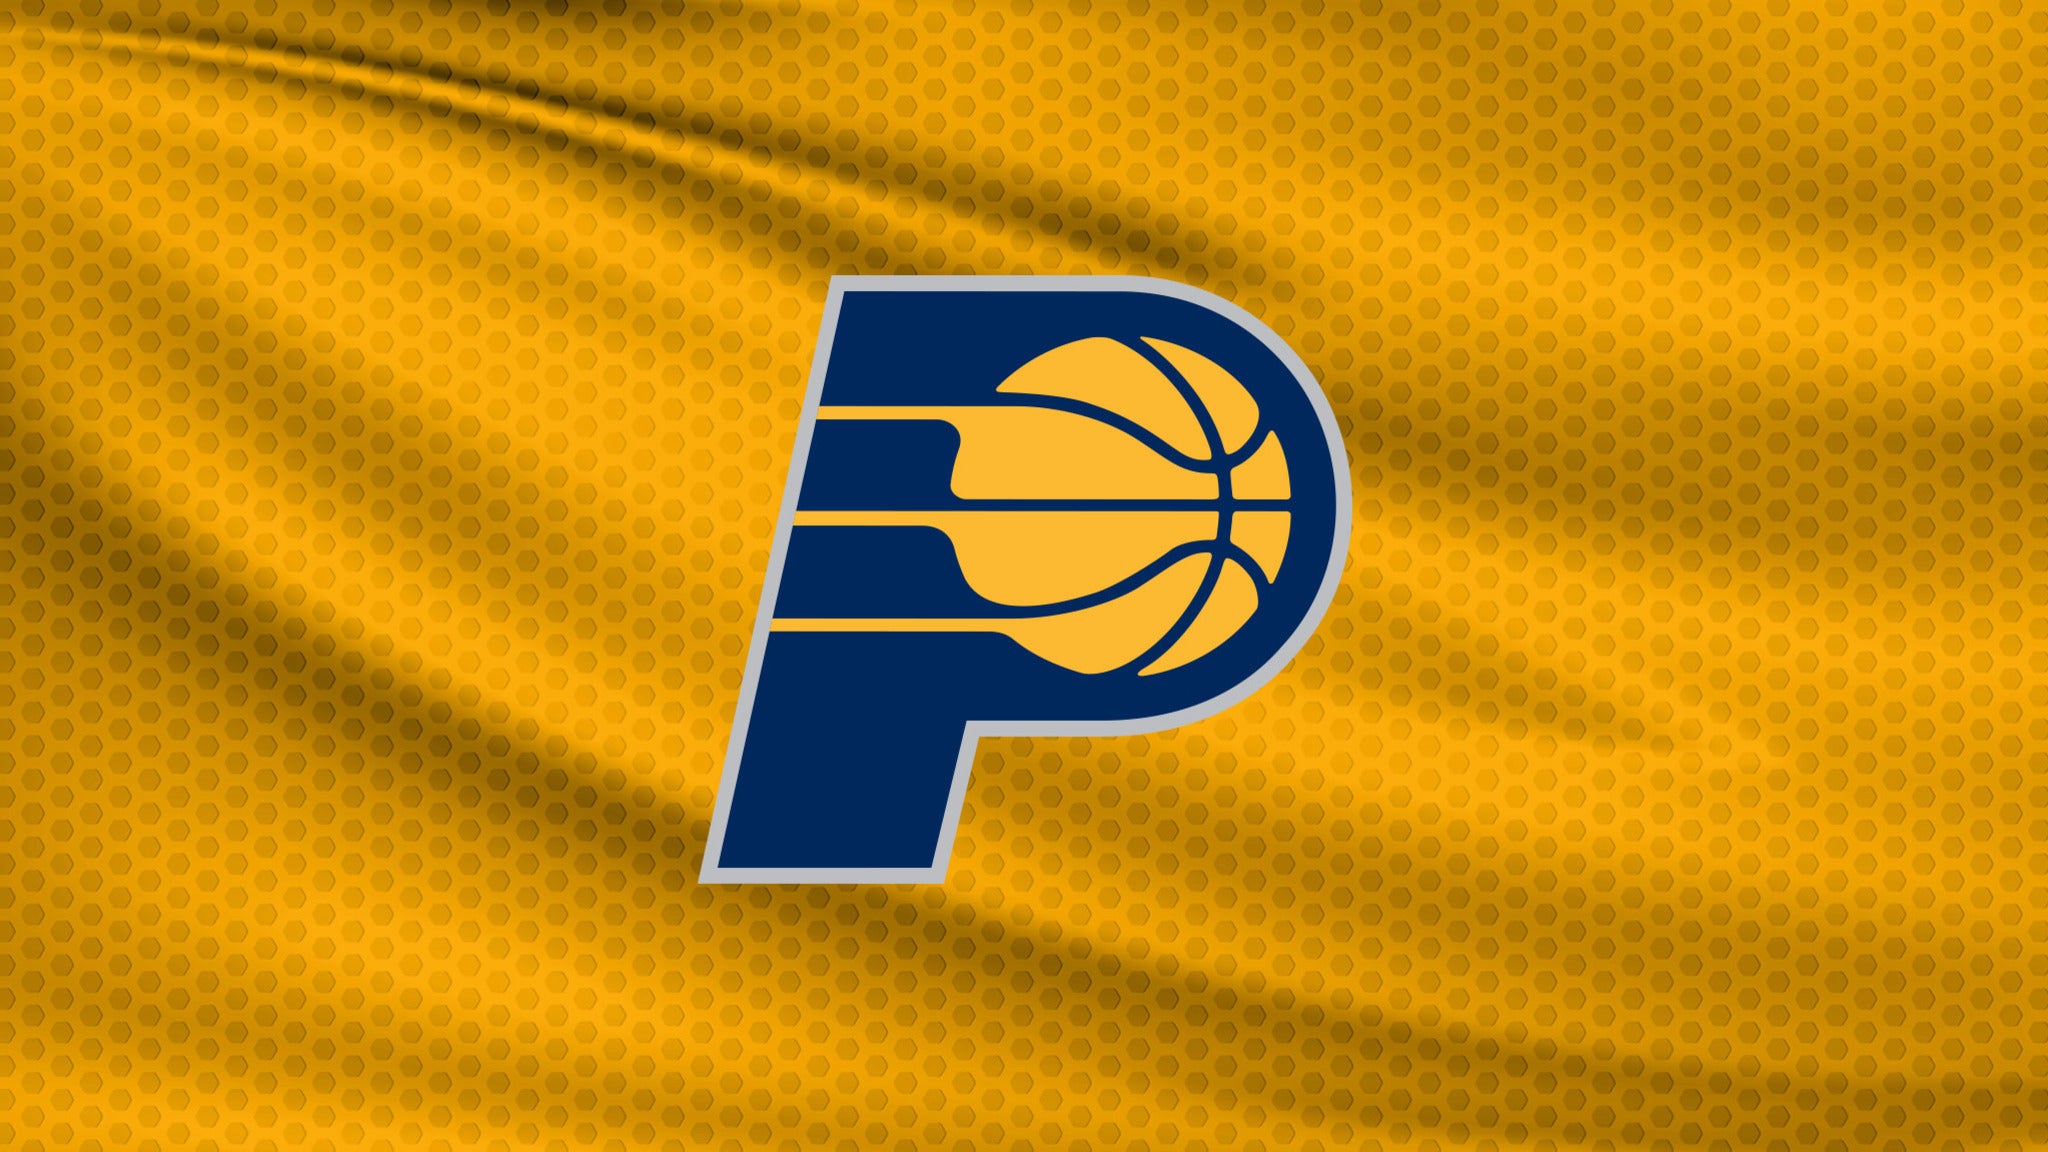 Indiana Pacers vs. New York Knicks